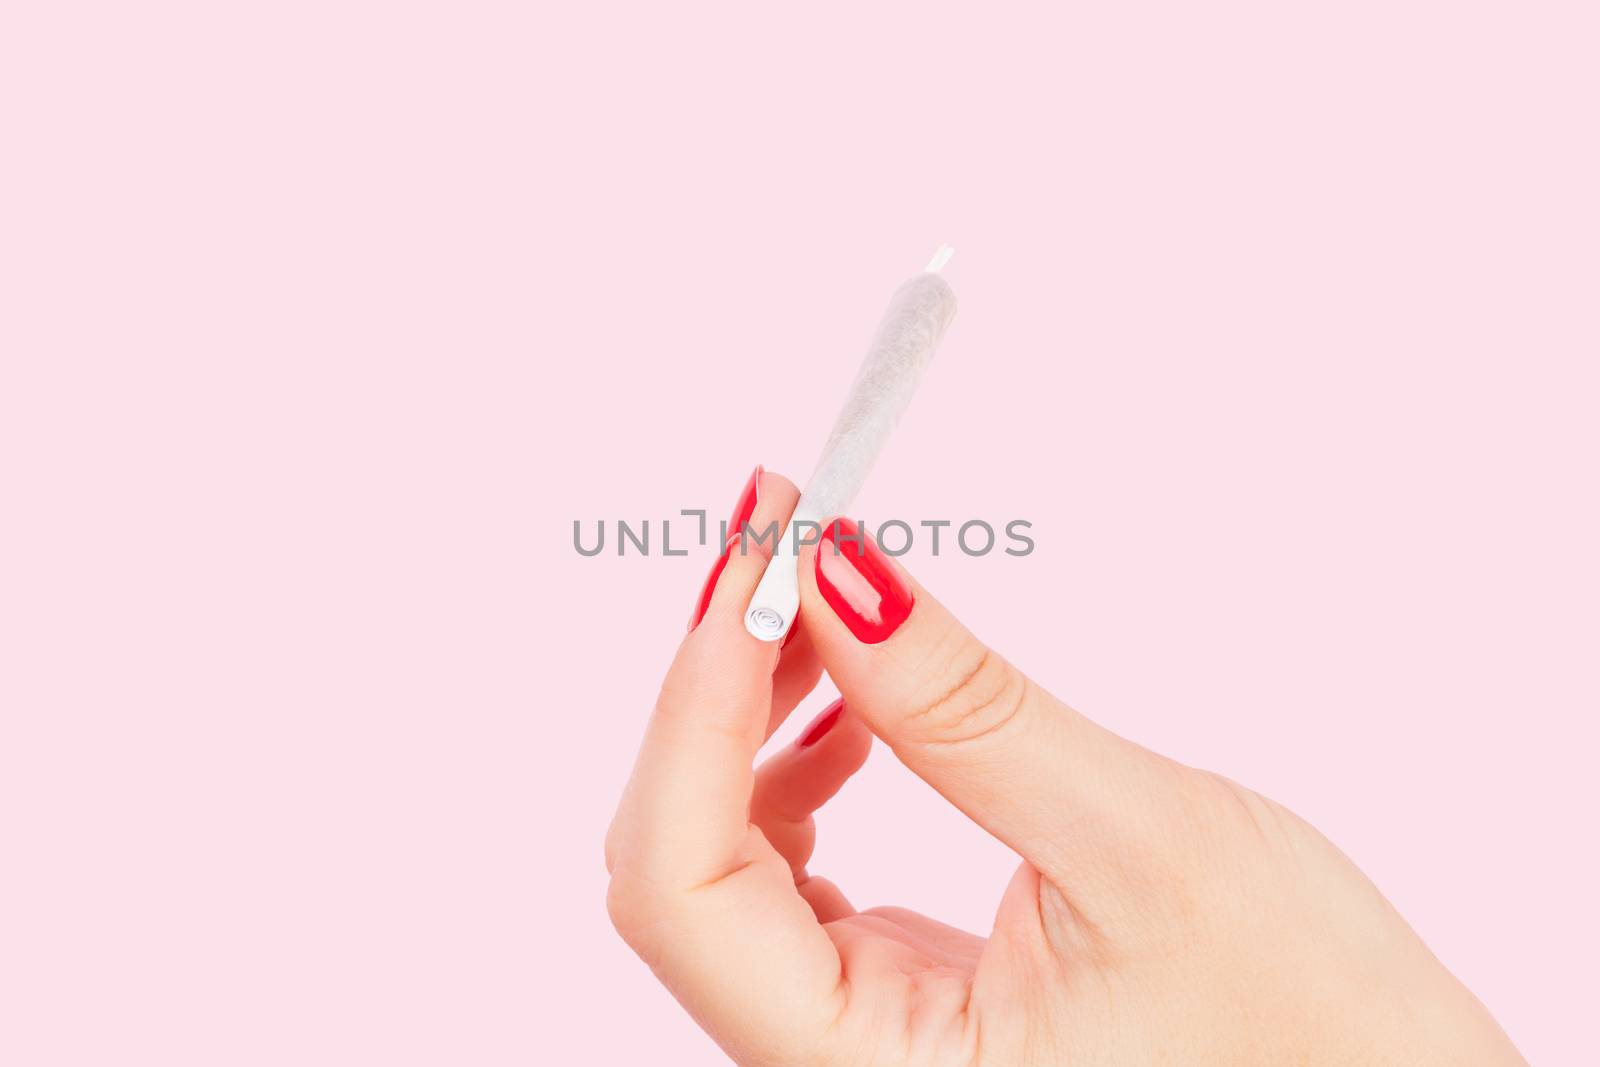 Female hand with red fingernails holding cannabis joint isolated on pink background. Sexy weed smoking.